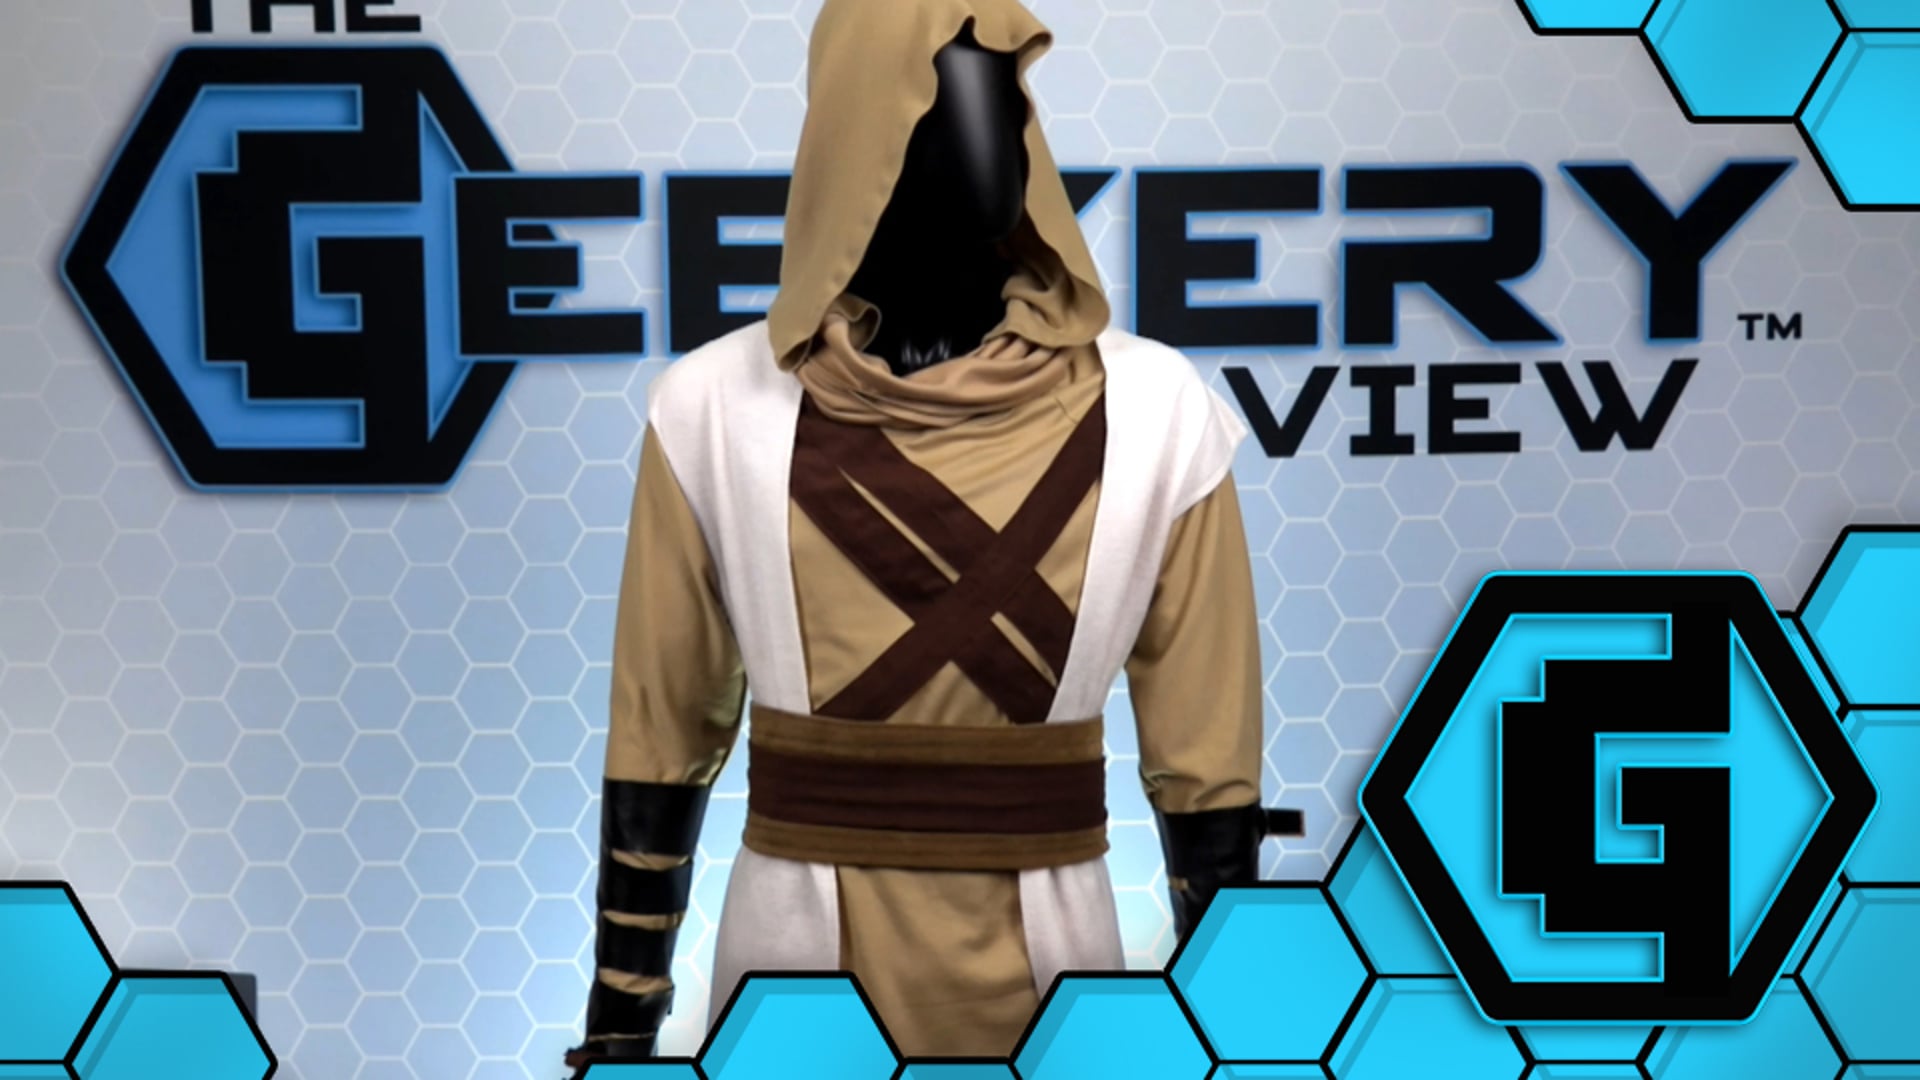 The Geekery View - Jedi Costume